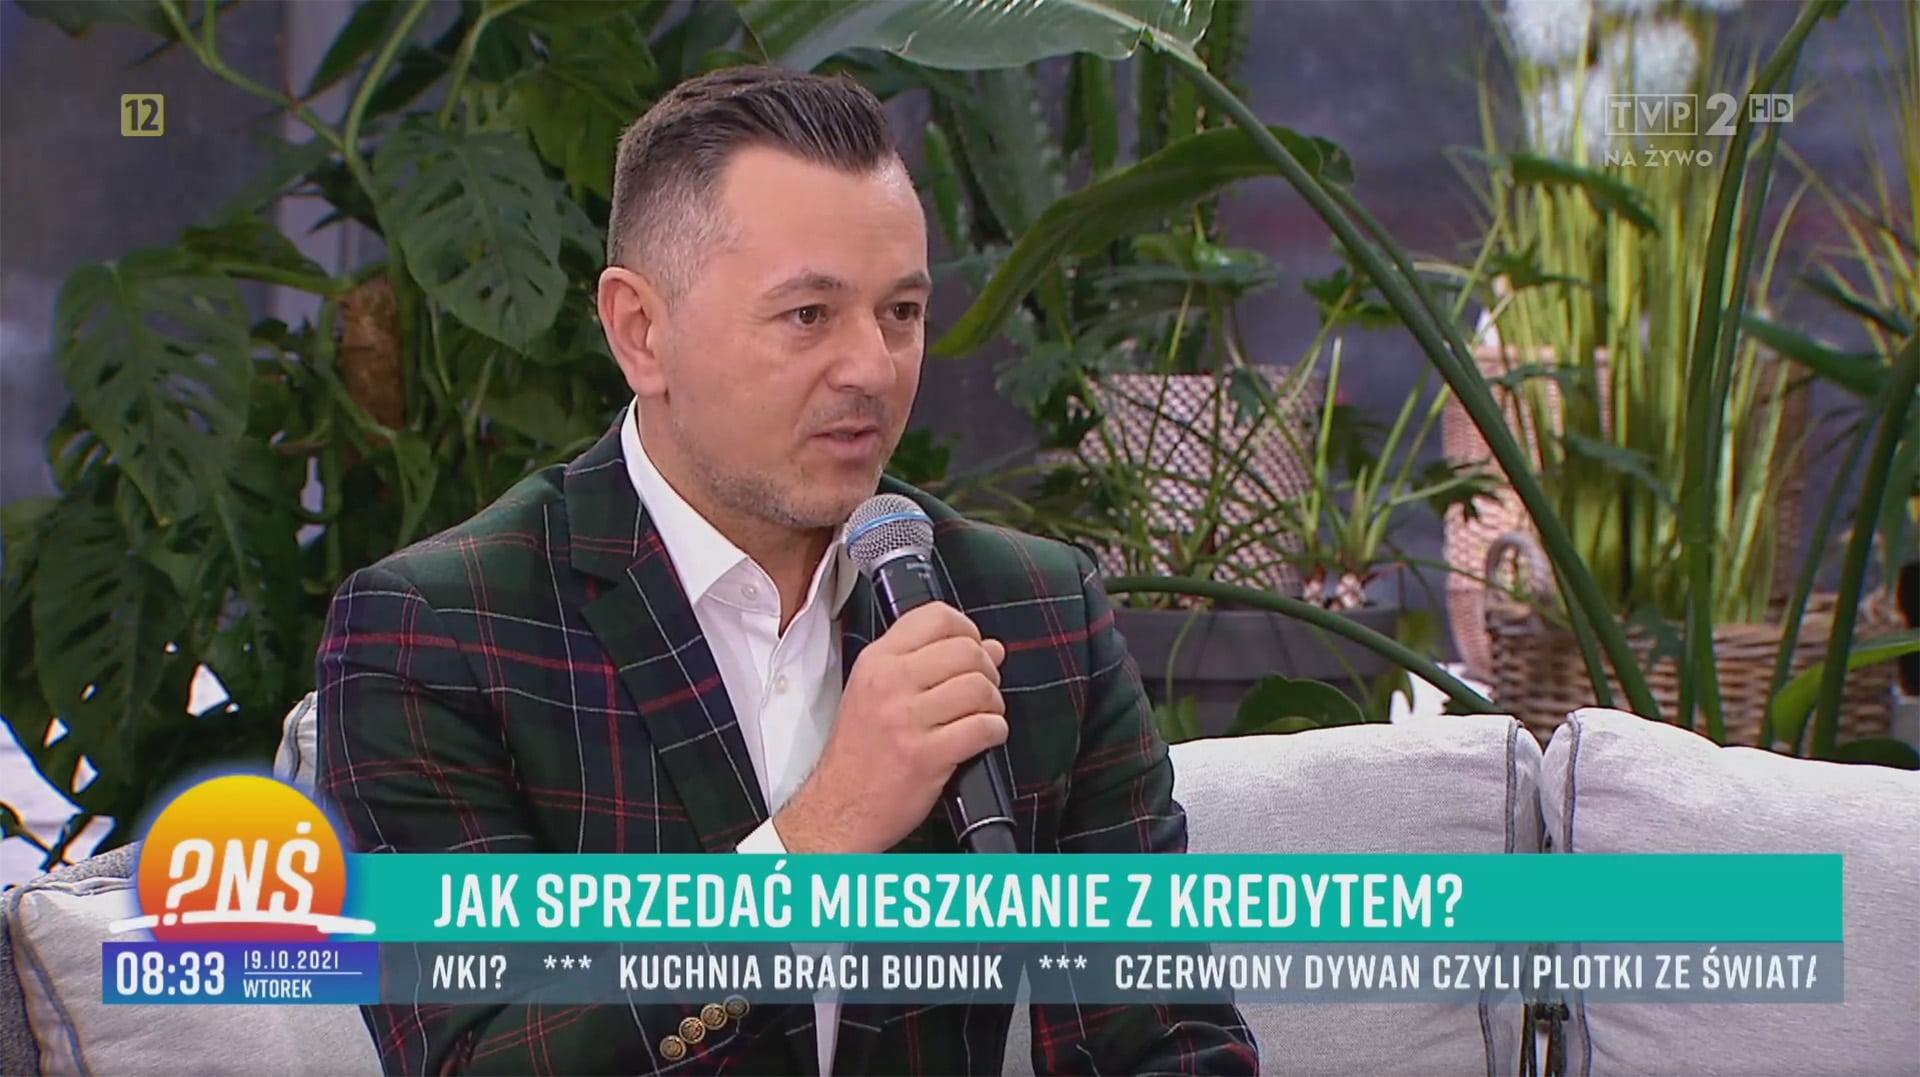 The founder of Kup i Mieszkaj appears as a guest on the ‘A Question for Breakfast’ morning show